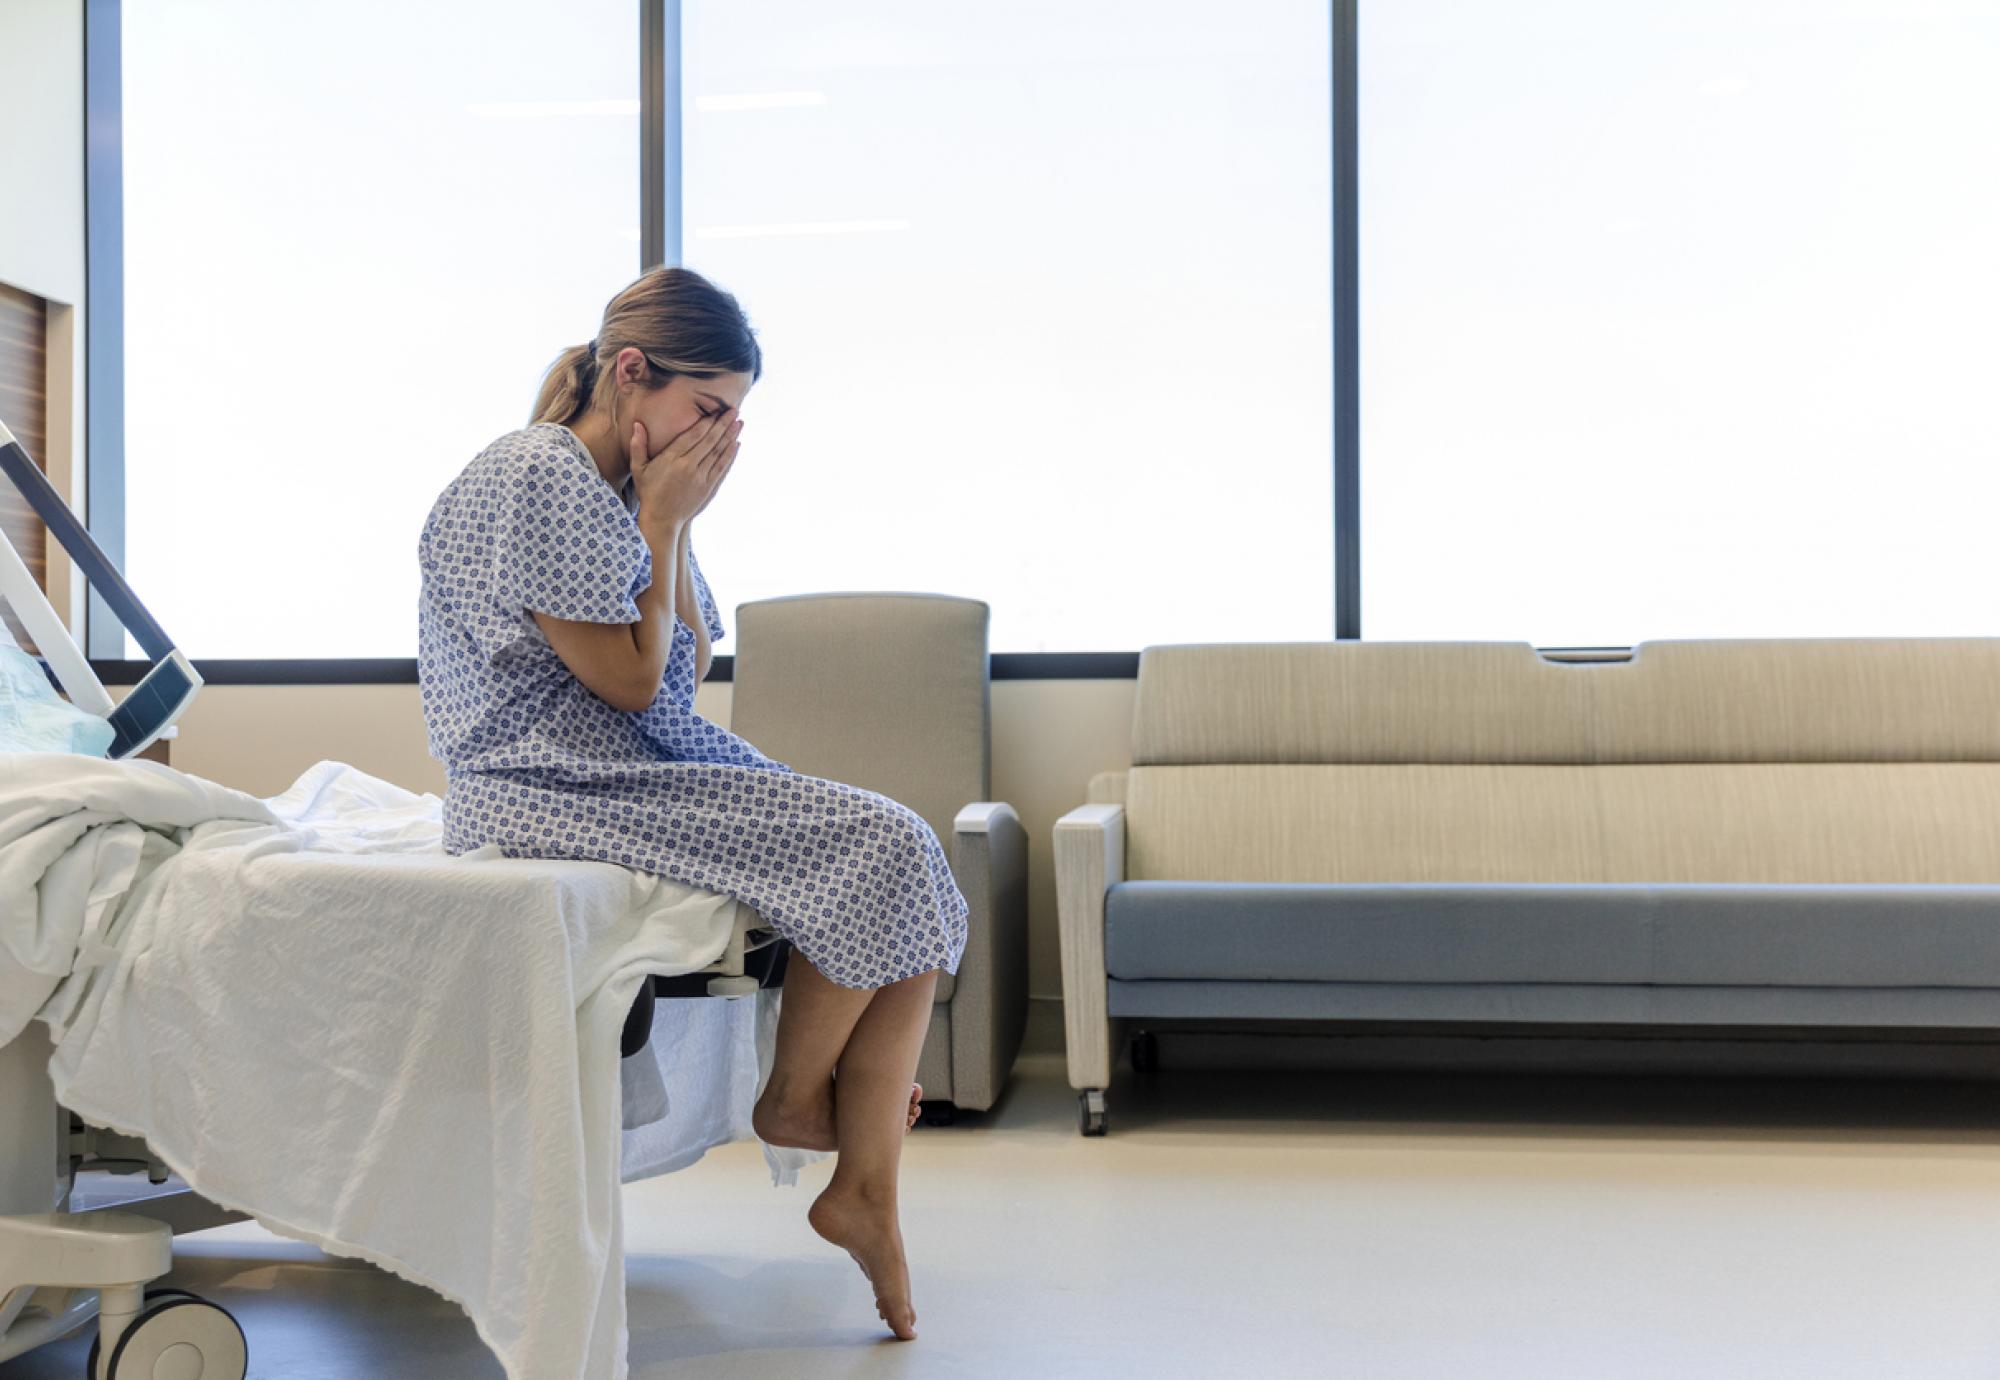 Patient sitting on a hospital bed depicting the NHS mental health crisis